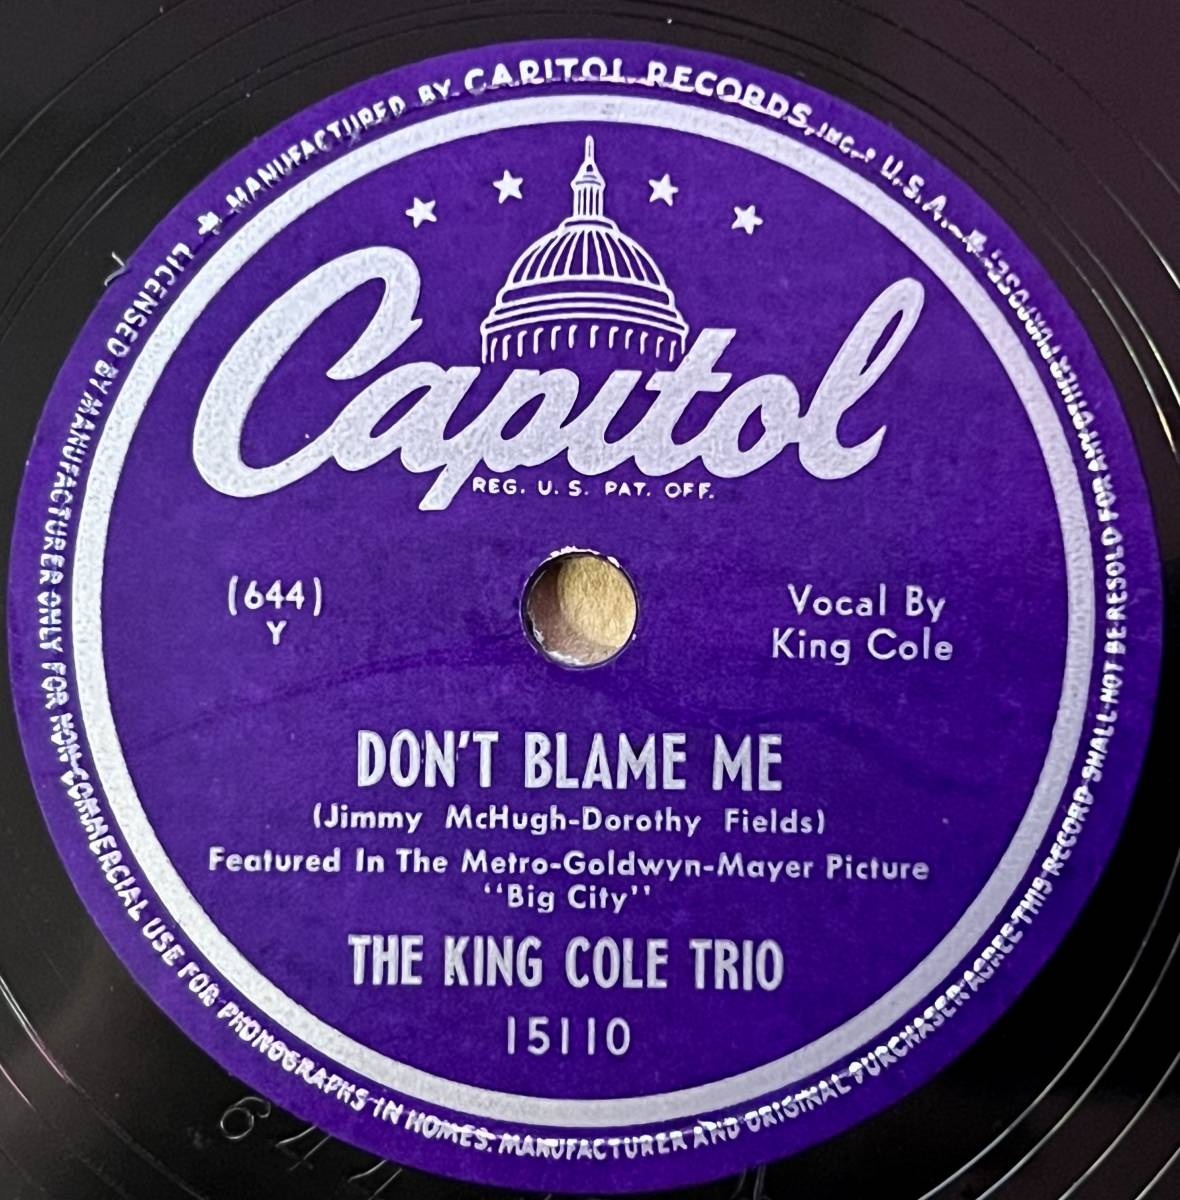 NAT KING COLE TRIO CAPITOL Don*t Blame Me/ I*ve Got A Way With Women